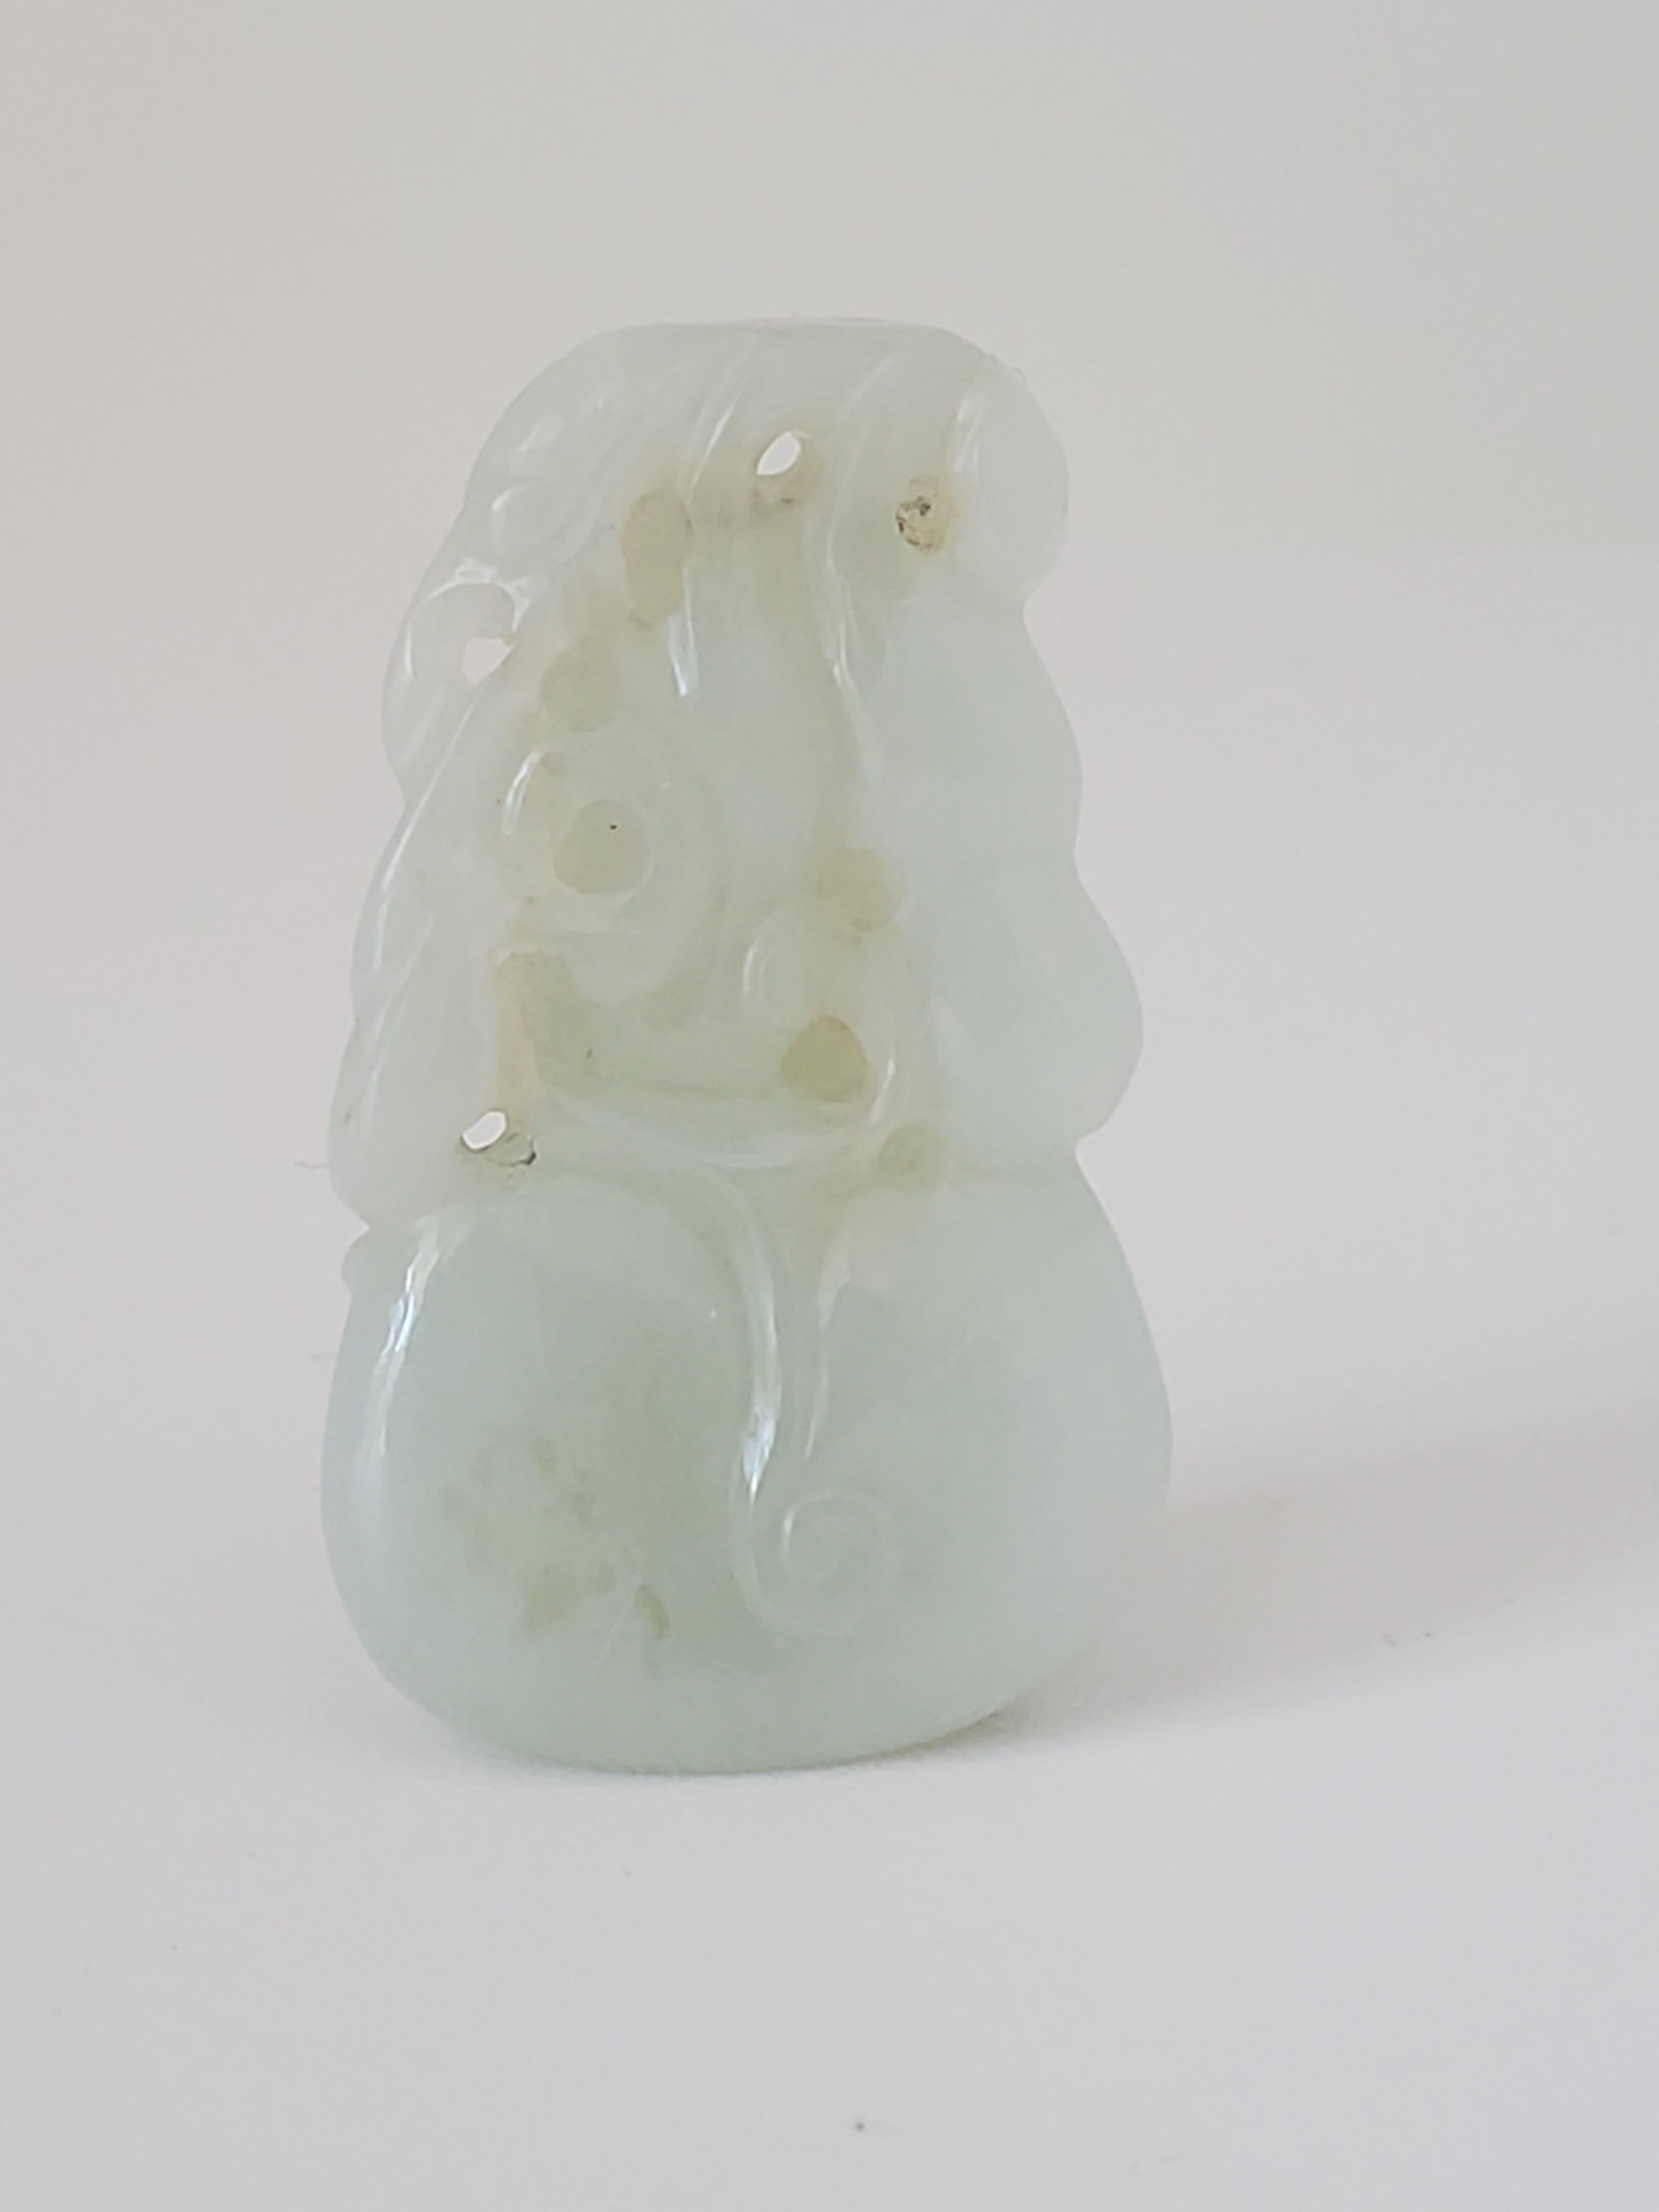 This antique nephrite jade double gourd pendant is of the Qing Dynasty and has a fine texture with a glossy luster. It is primarily white with some slight inclusions in the left lower body but in bright light the pendant has a slight green tinge.